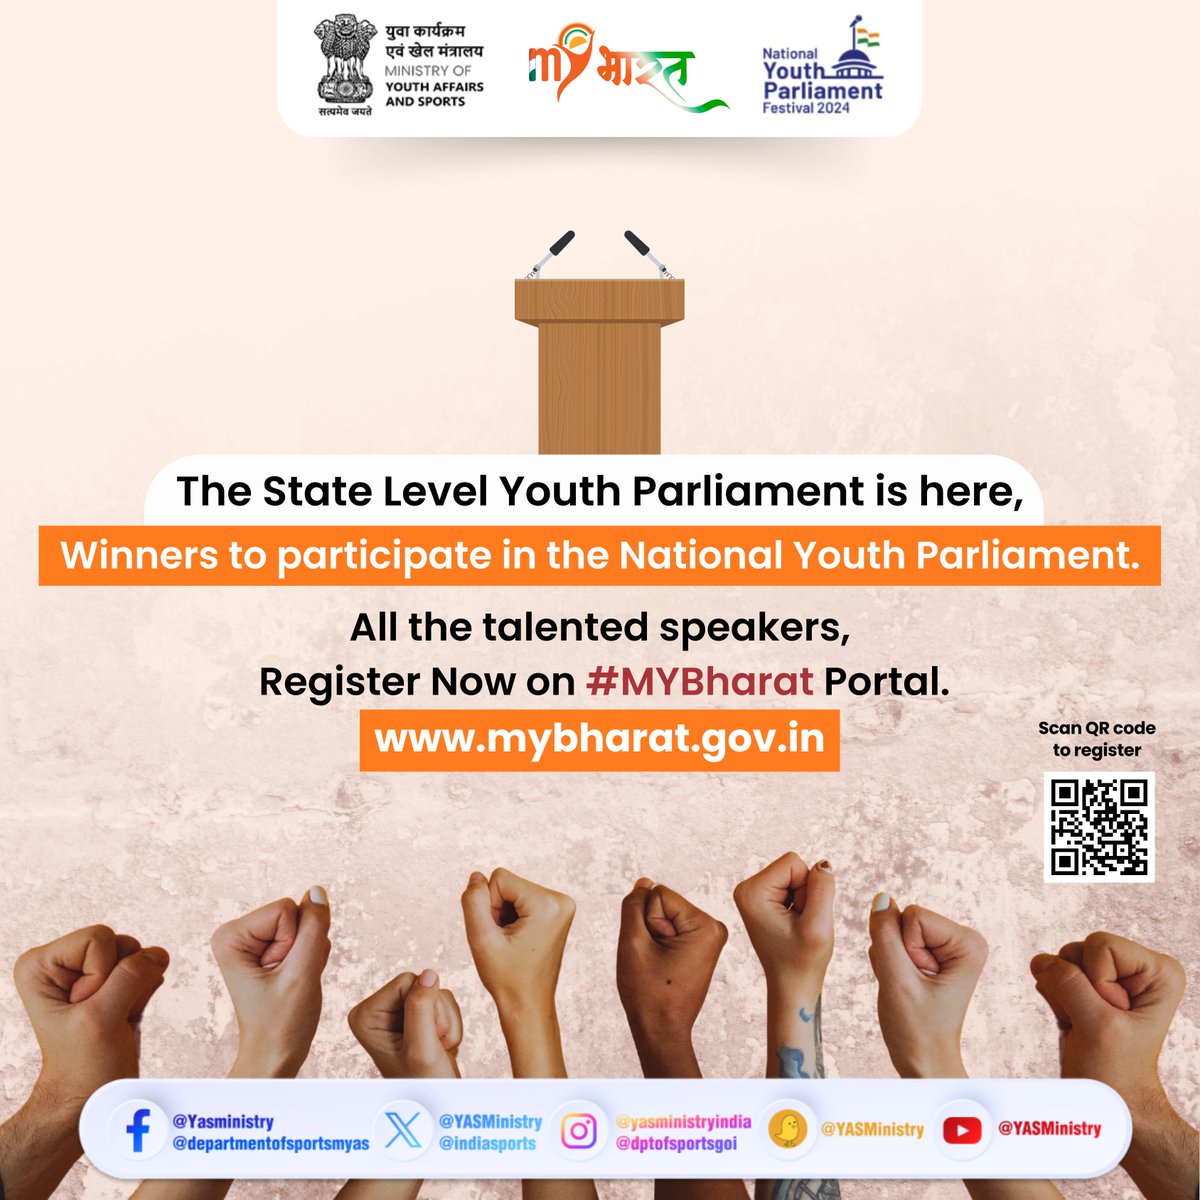 The #NationalYouthParliamentFestival2024 has reached the State Level, all talented speakers are invited to participate & showcase their talent. The winners will get the opportunity to represent their State at the #NYPF2024. 🇮🇳 For participation visit mybharat.gov.in.